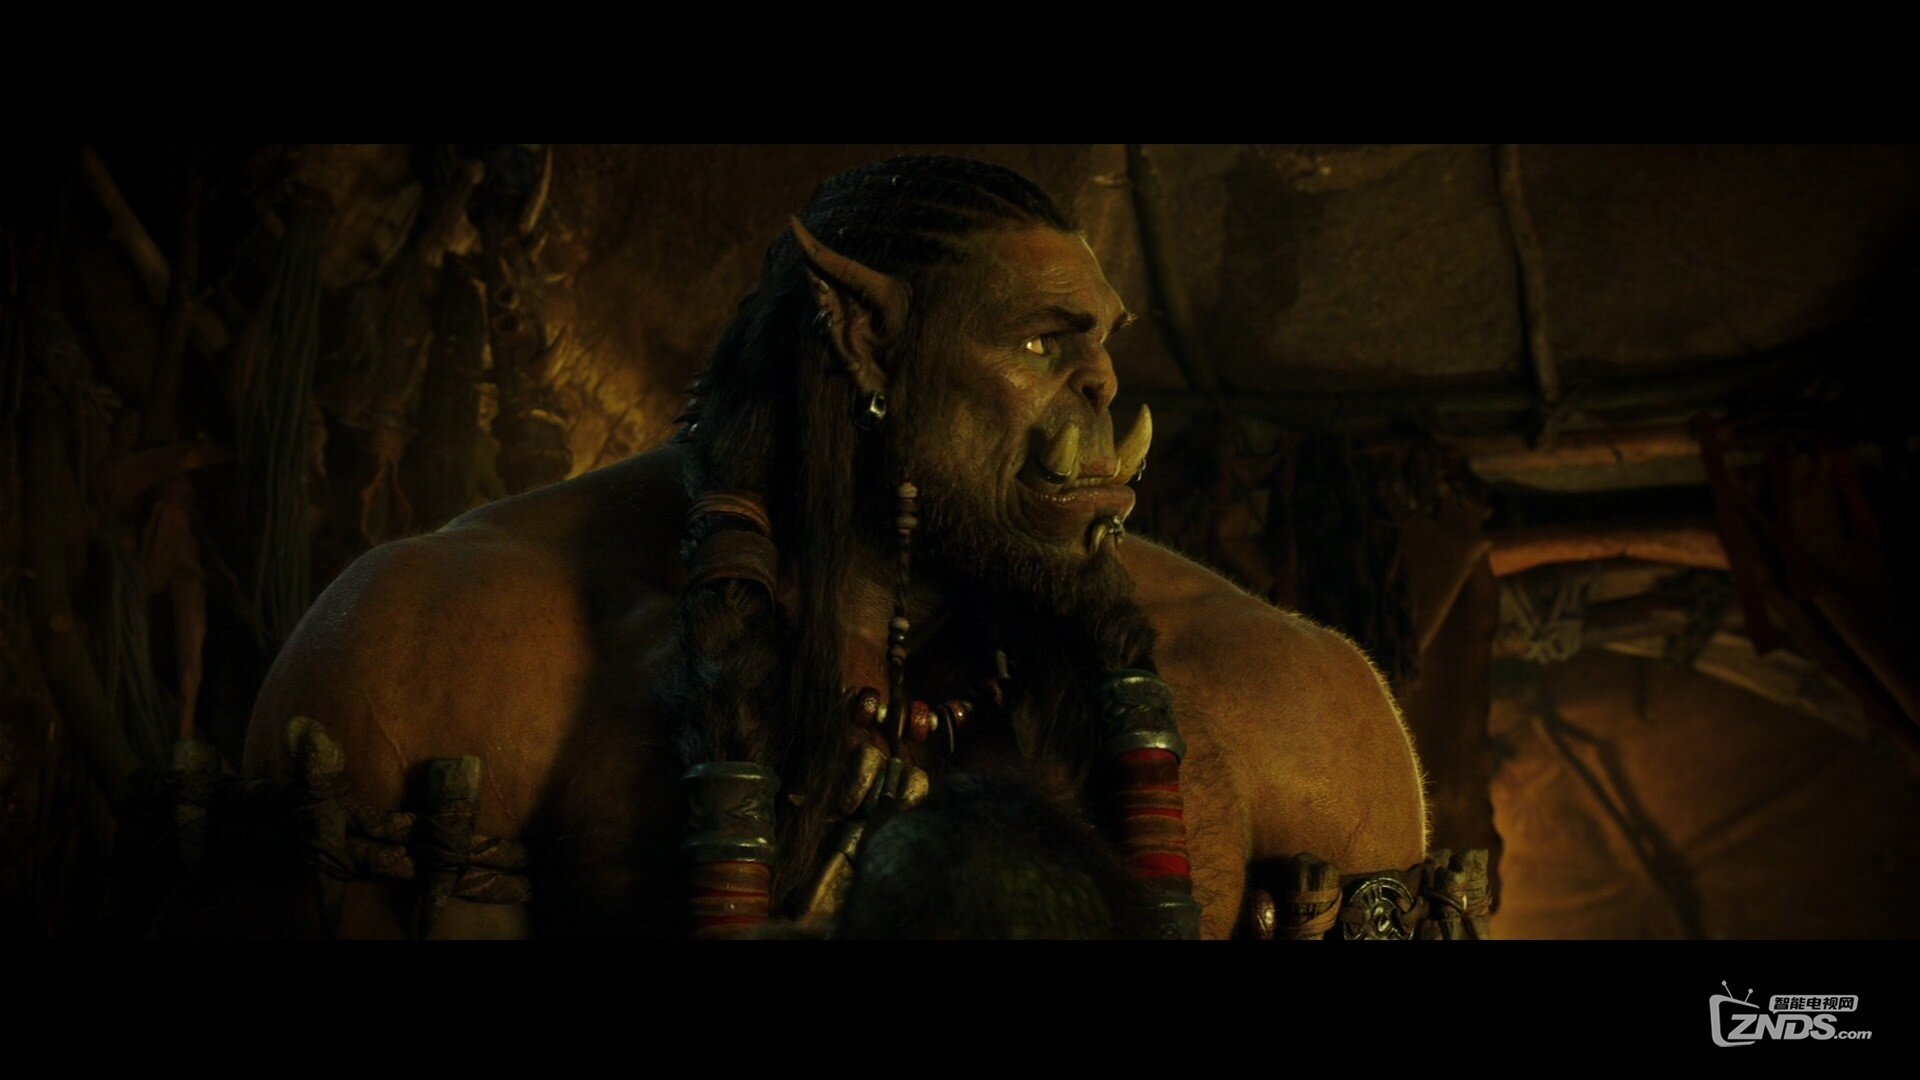 Warcraft_Trailer1_Texted_Stereo_PCM_1080p.mov_20160214_211352.031.jpg